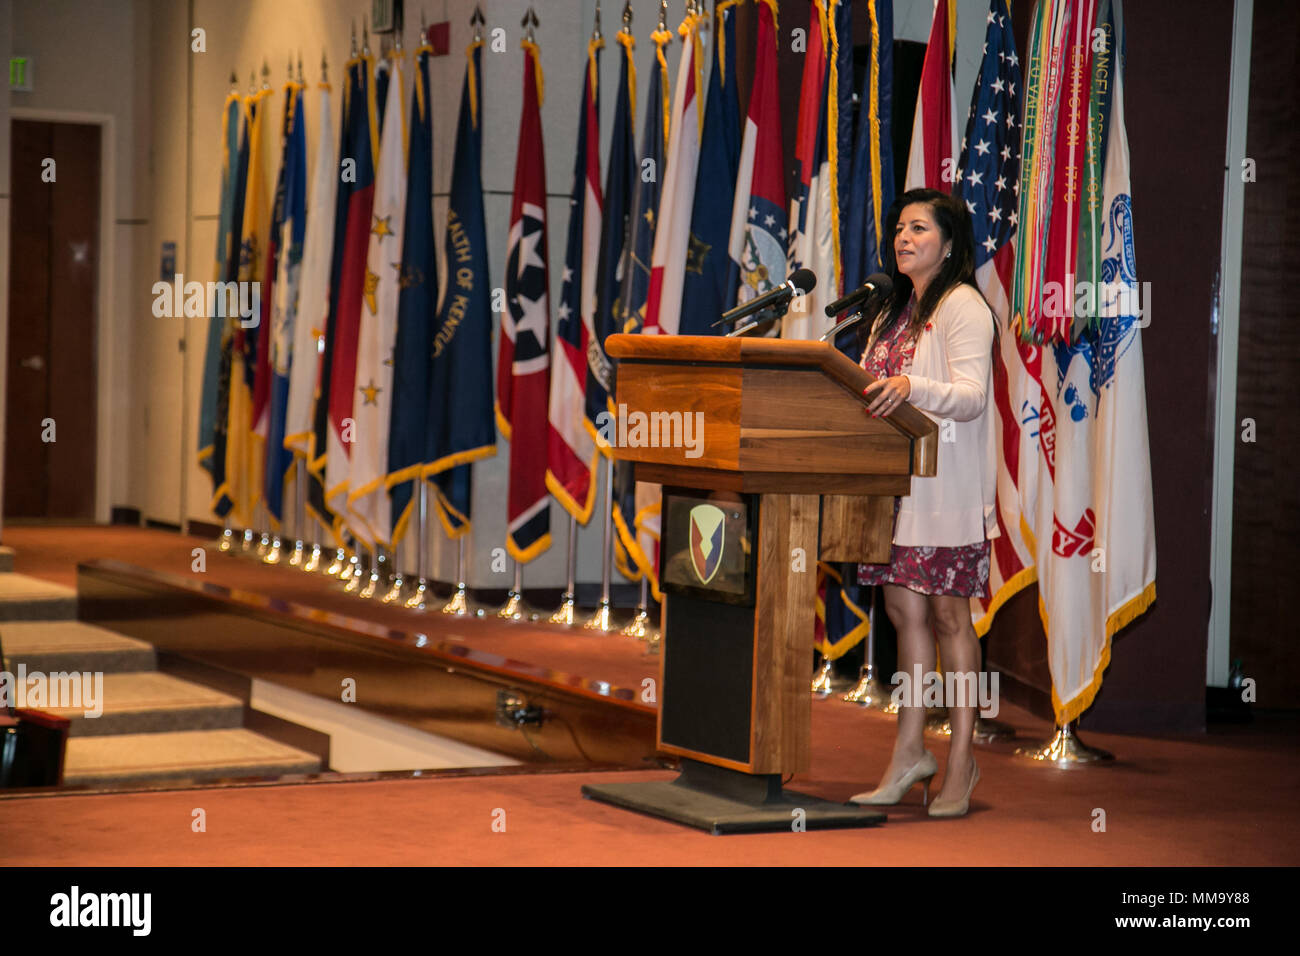 Christine Chavez gives her remarks as the keynote speaker during the Hispanic-American Heritage Month Observance Sept. 25, 2017 at Redstone Arsenal, Alabama.  Chavez is the granddaughter of labor leader and civil rights activist Cesar Chavez.  (U.S. Army photo by Sgt. 1st Class Teddy Wade) Stock Photo